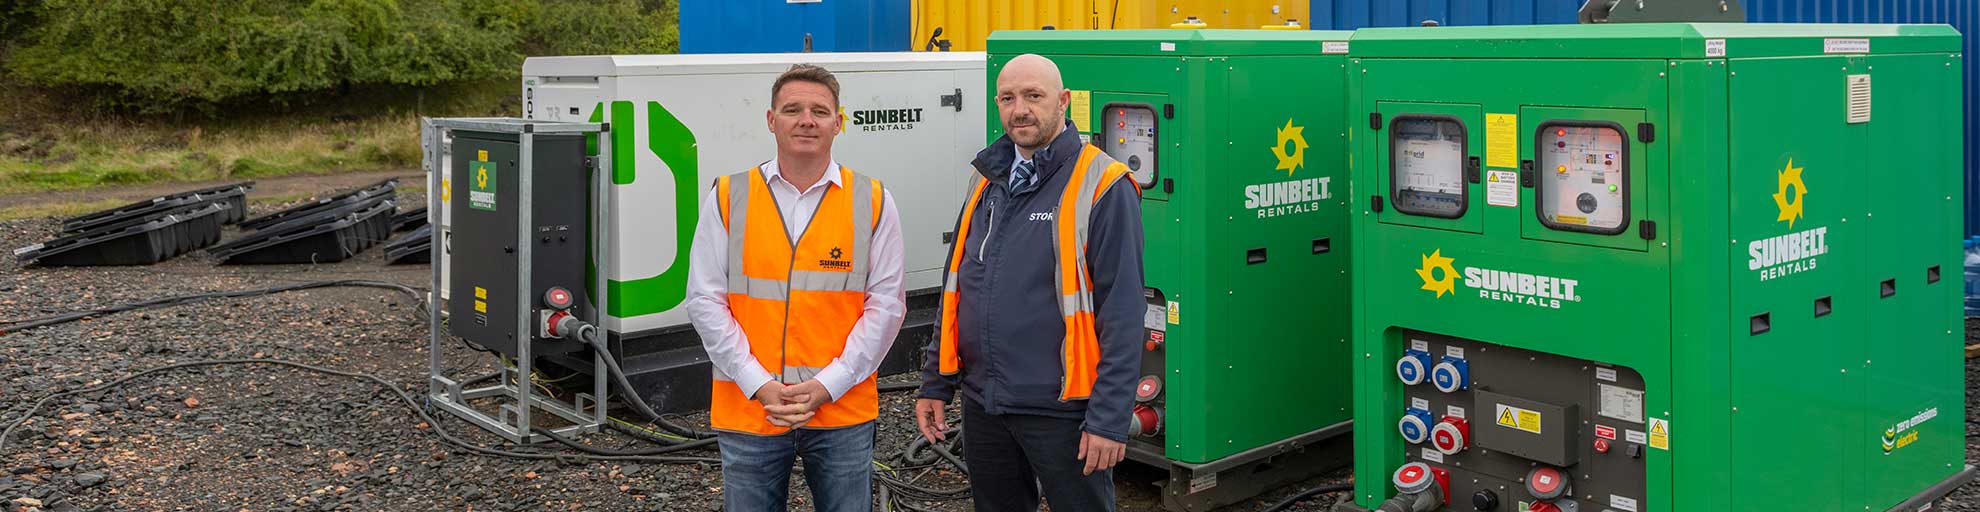 Two Project Managers Stood In front Of Battery Storage Units And A Hybrid Generator